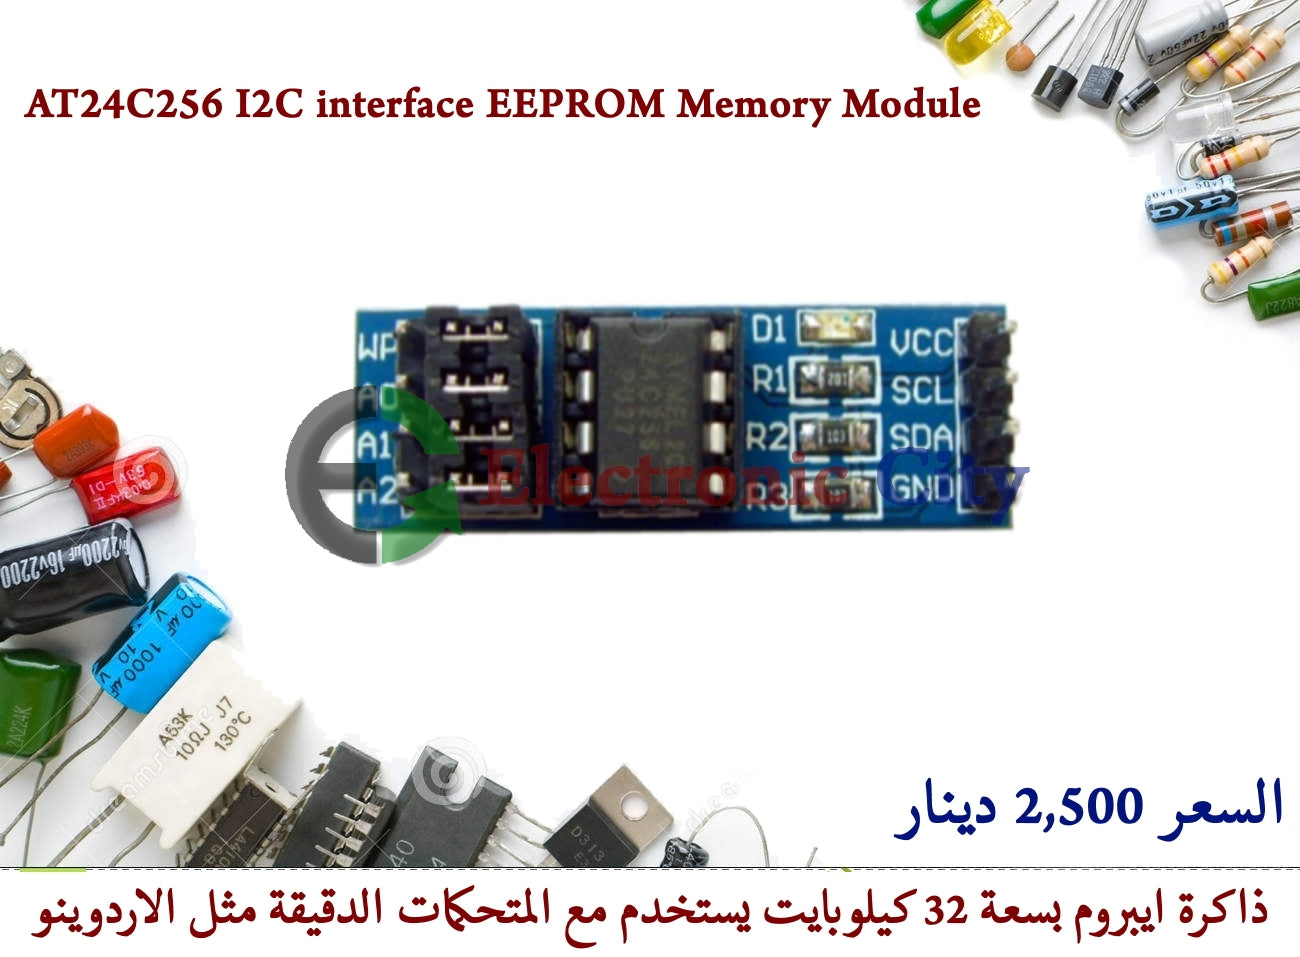 AT24C256 I2C interface EEPROM Memory Module #S2 011091